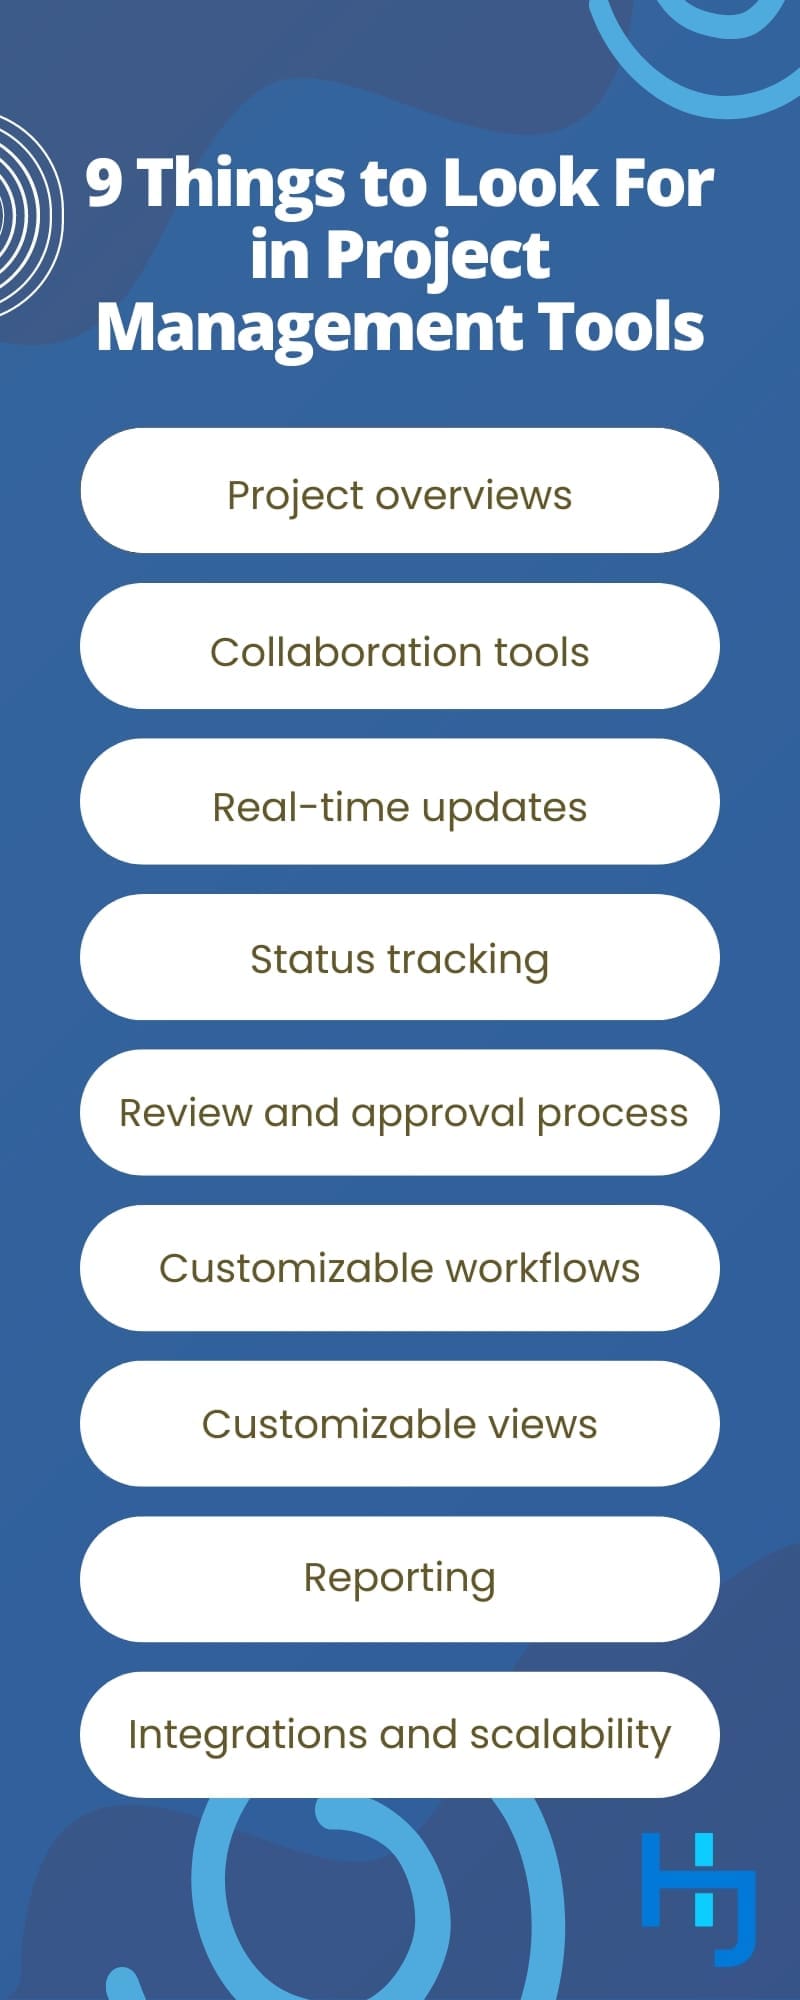 9 Things to Look For in Project Management Tools